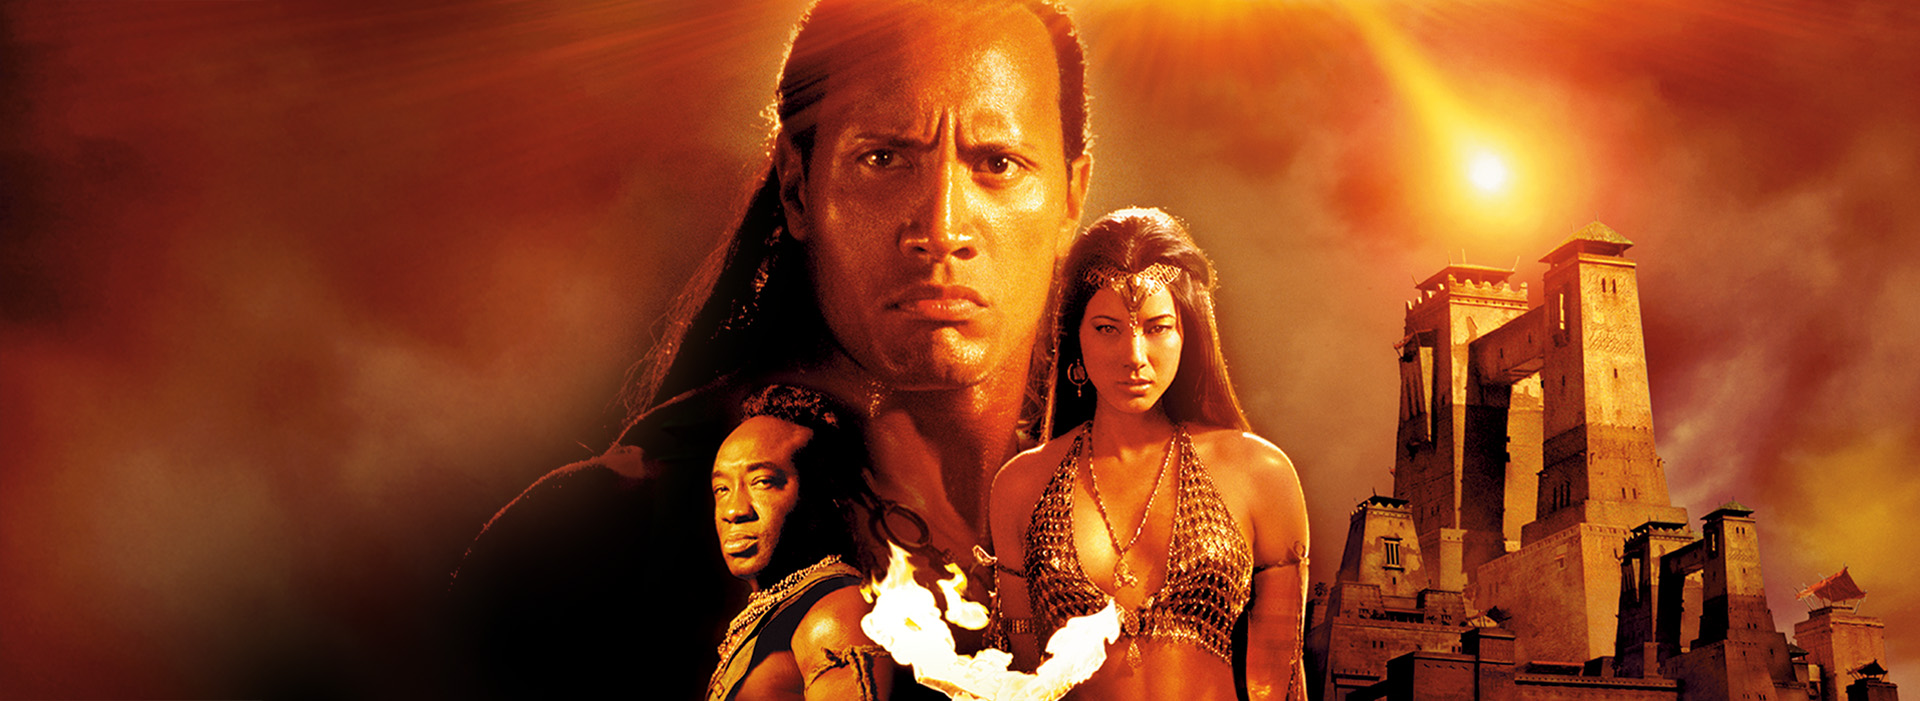 Movie poster The Scorpion King